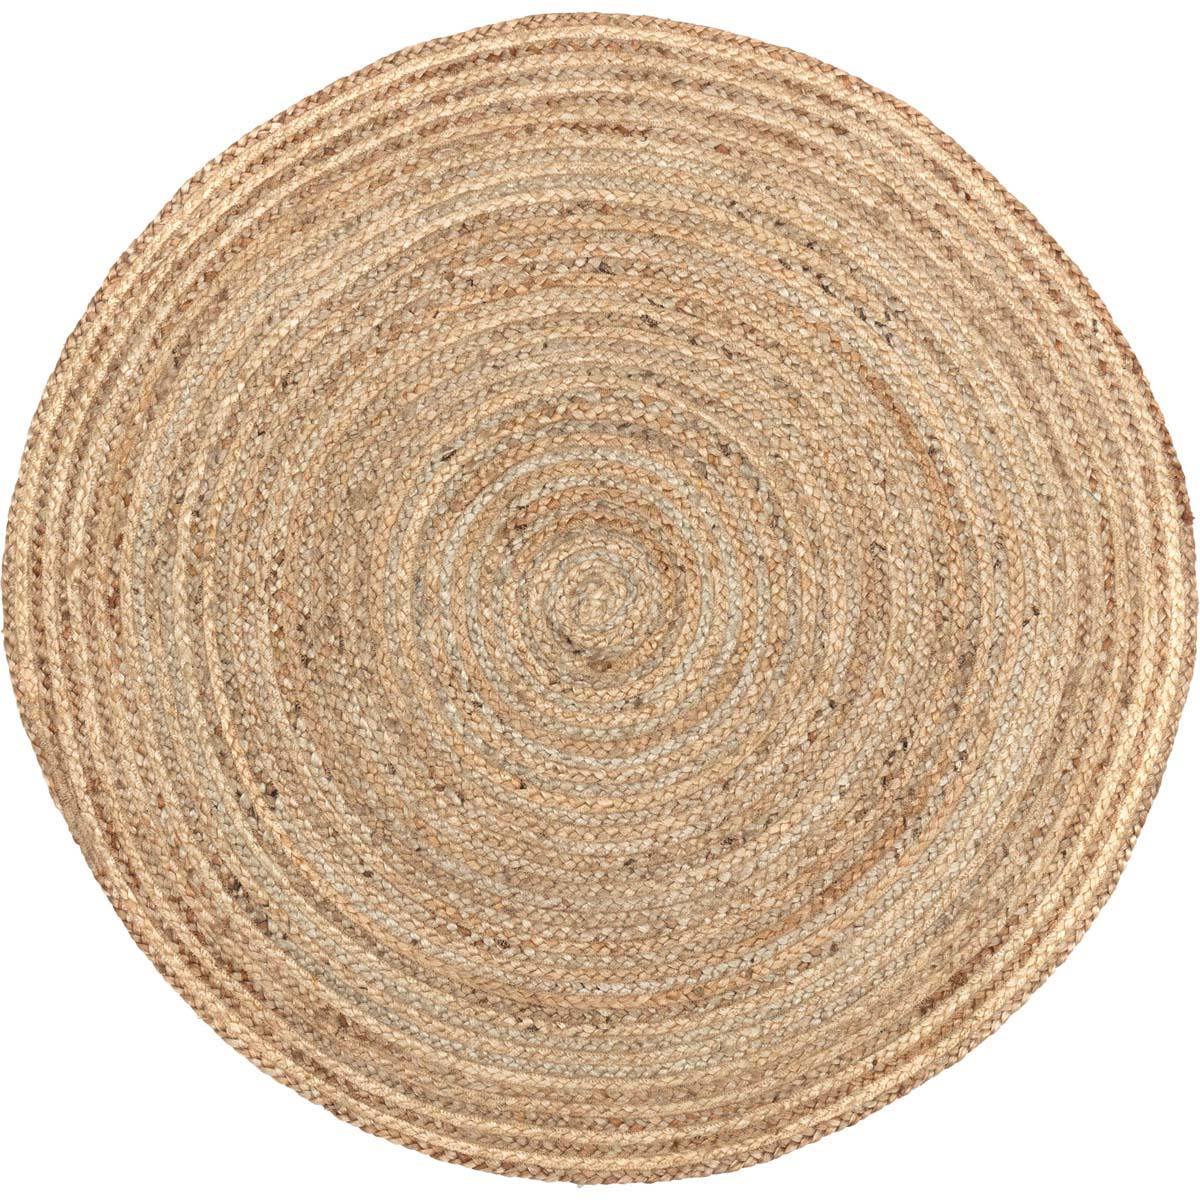 Harlow Jute Braided Rug Round 3ft with Rug Pad VHC Brands - The Fox Decor